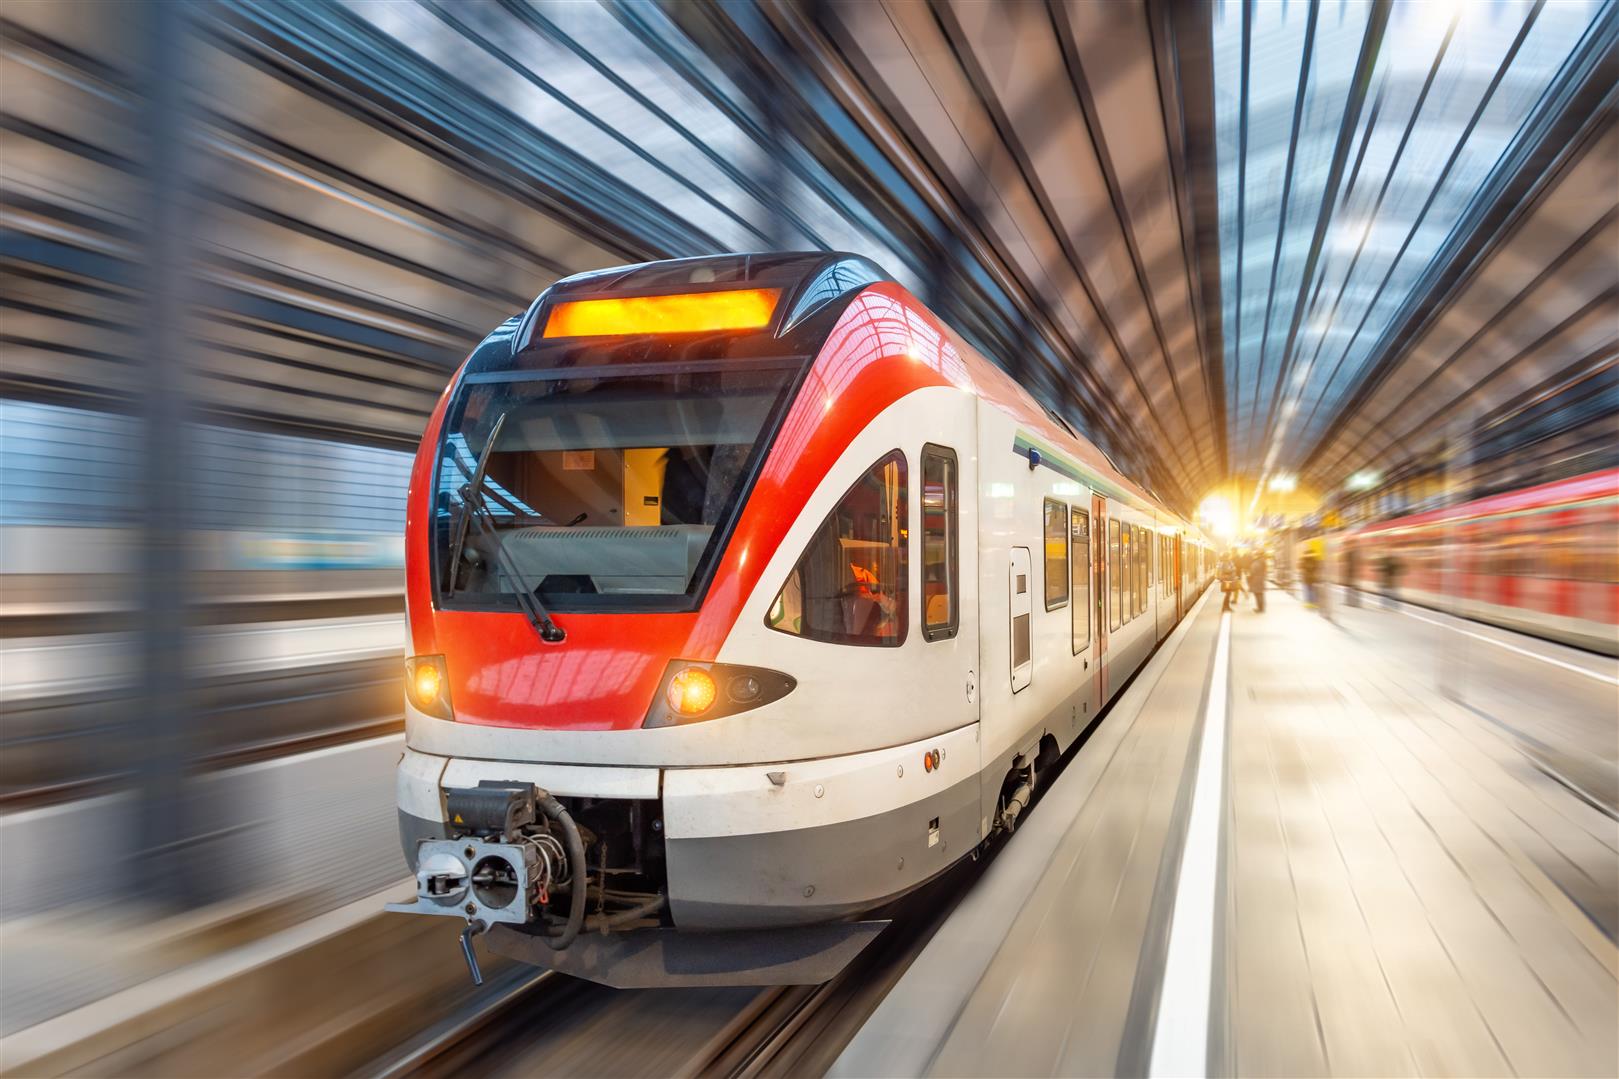 High-speed trains, connecting trade, investment, and tourism